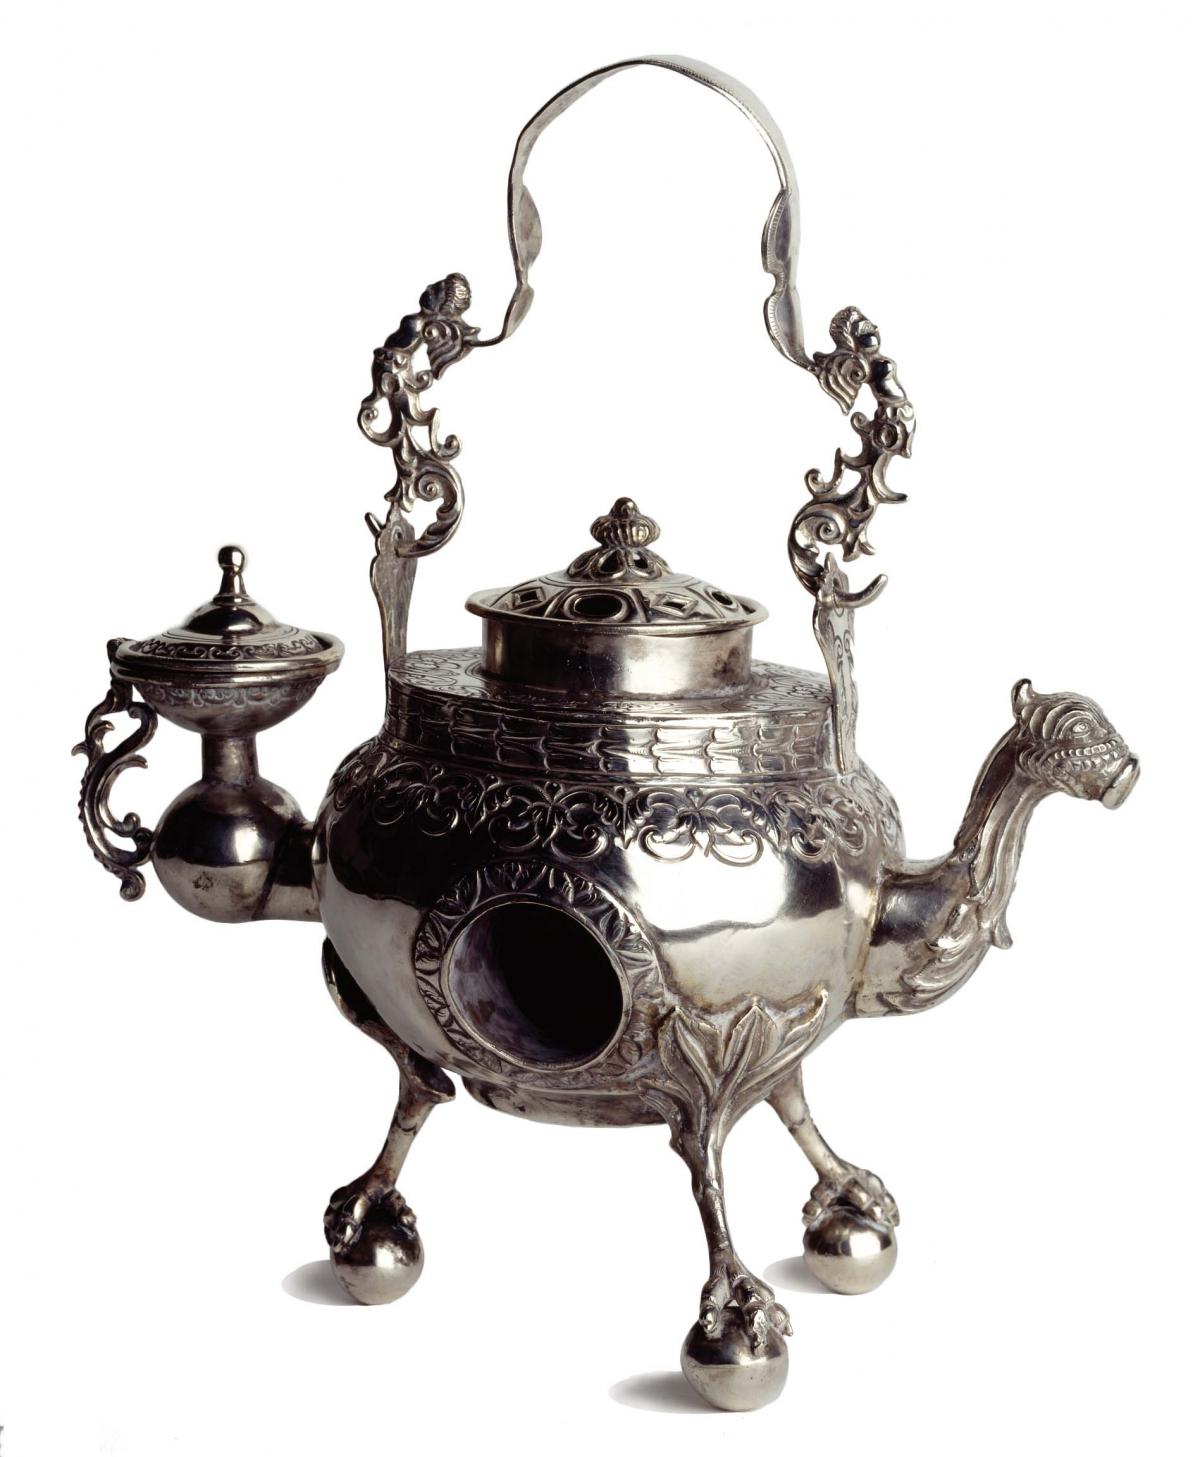 Silver water heater, with a camel head for a spout and hoofed legs for stands, with elaborate filigree work